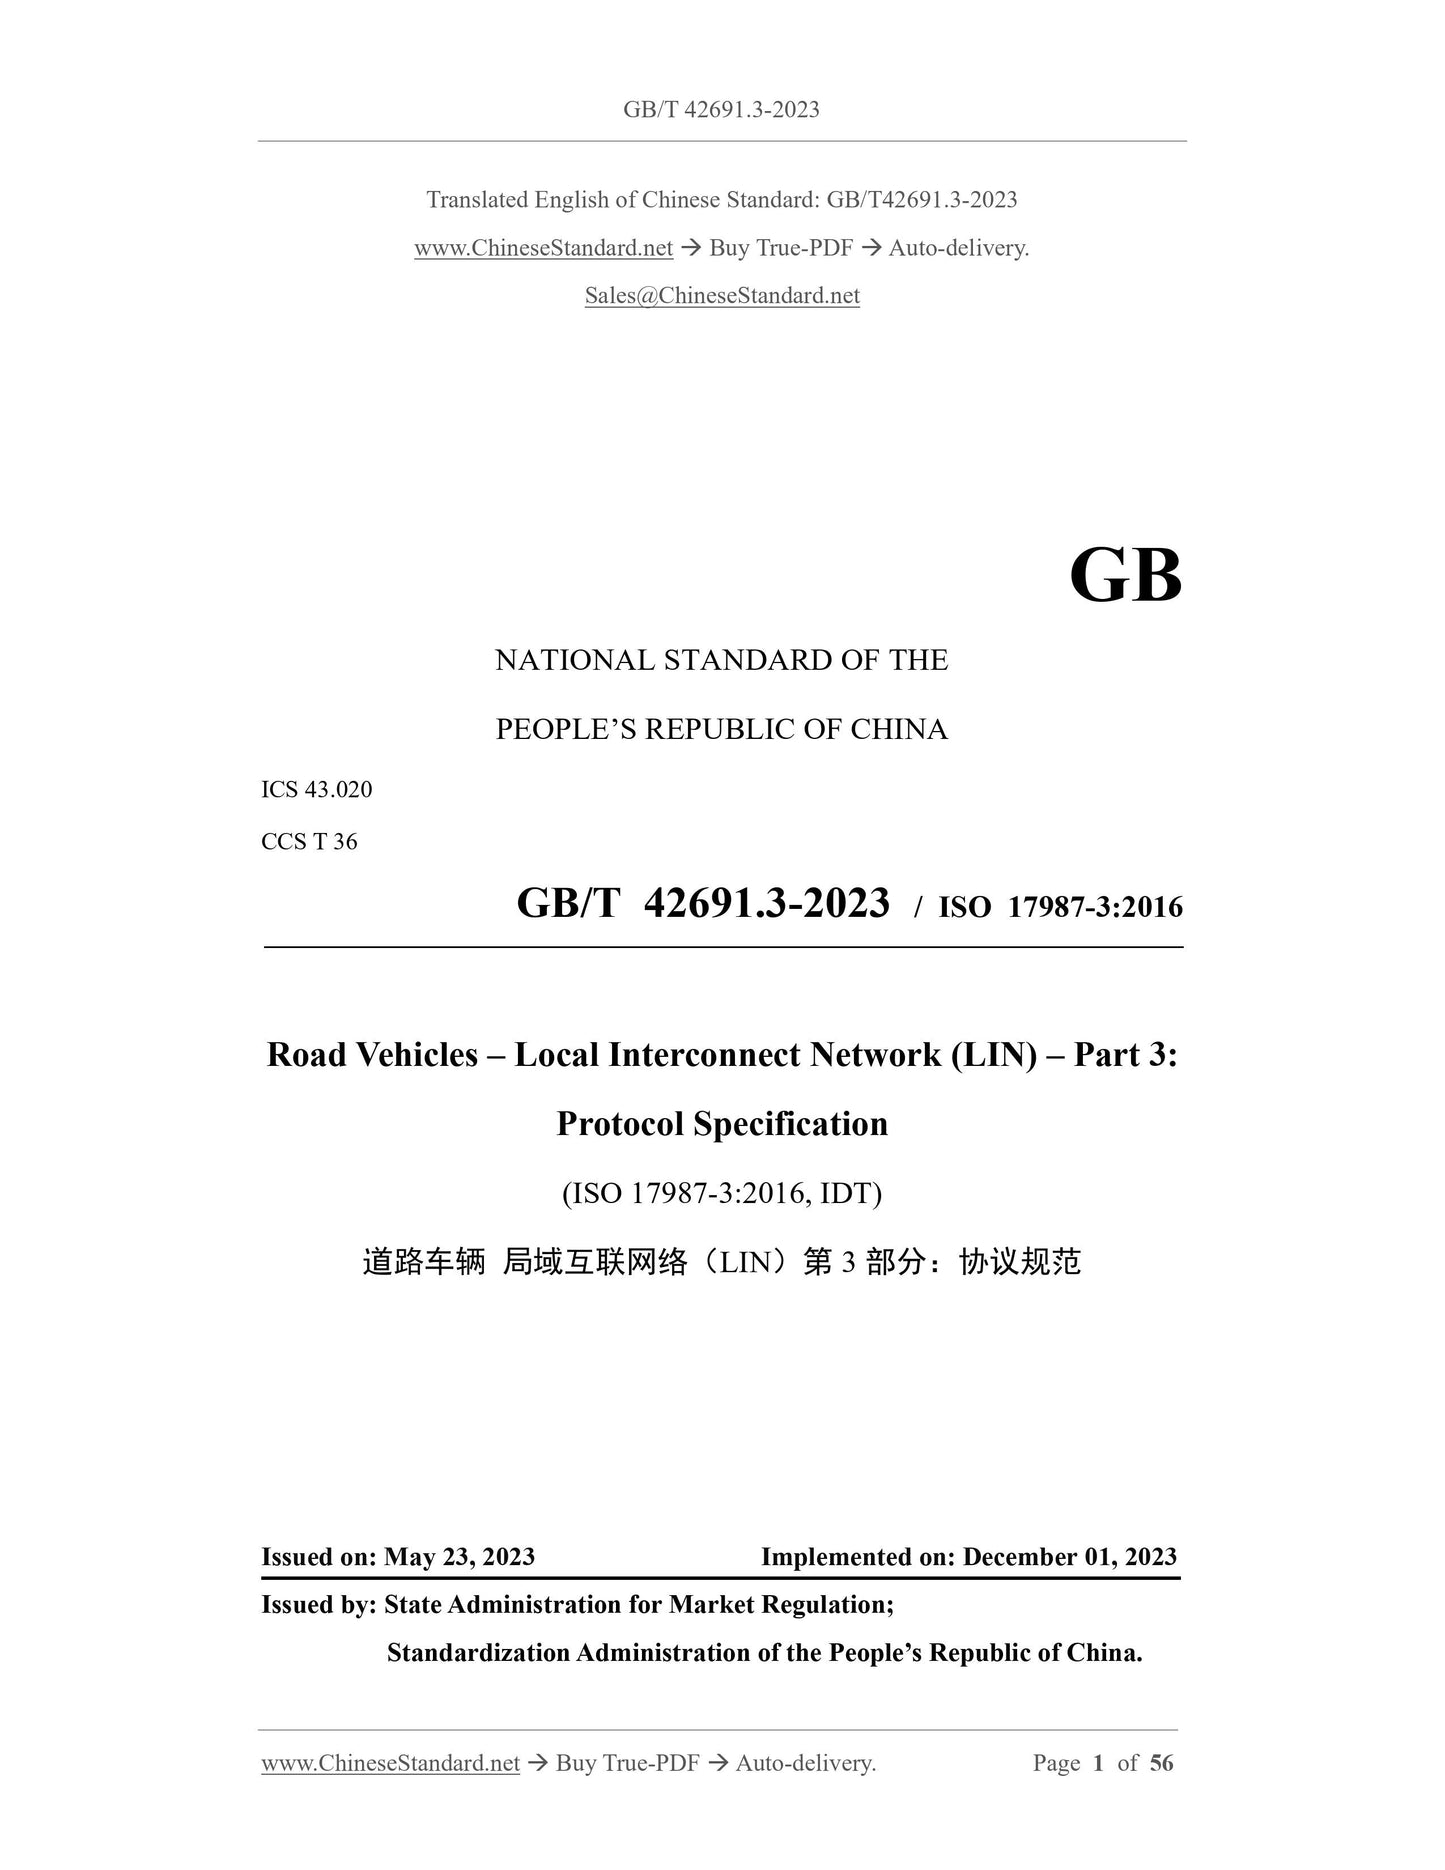 GB/T 42691.3-2023 Page 1